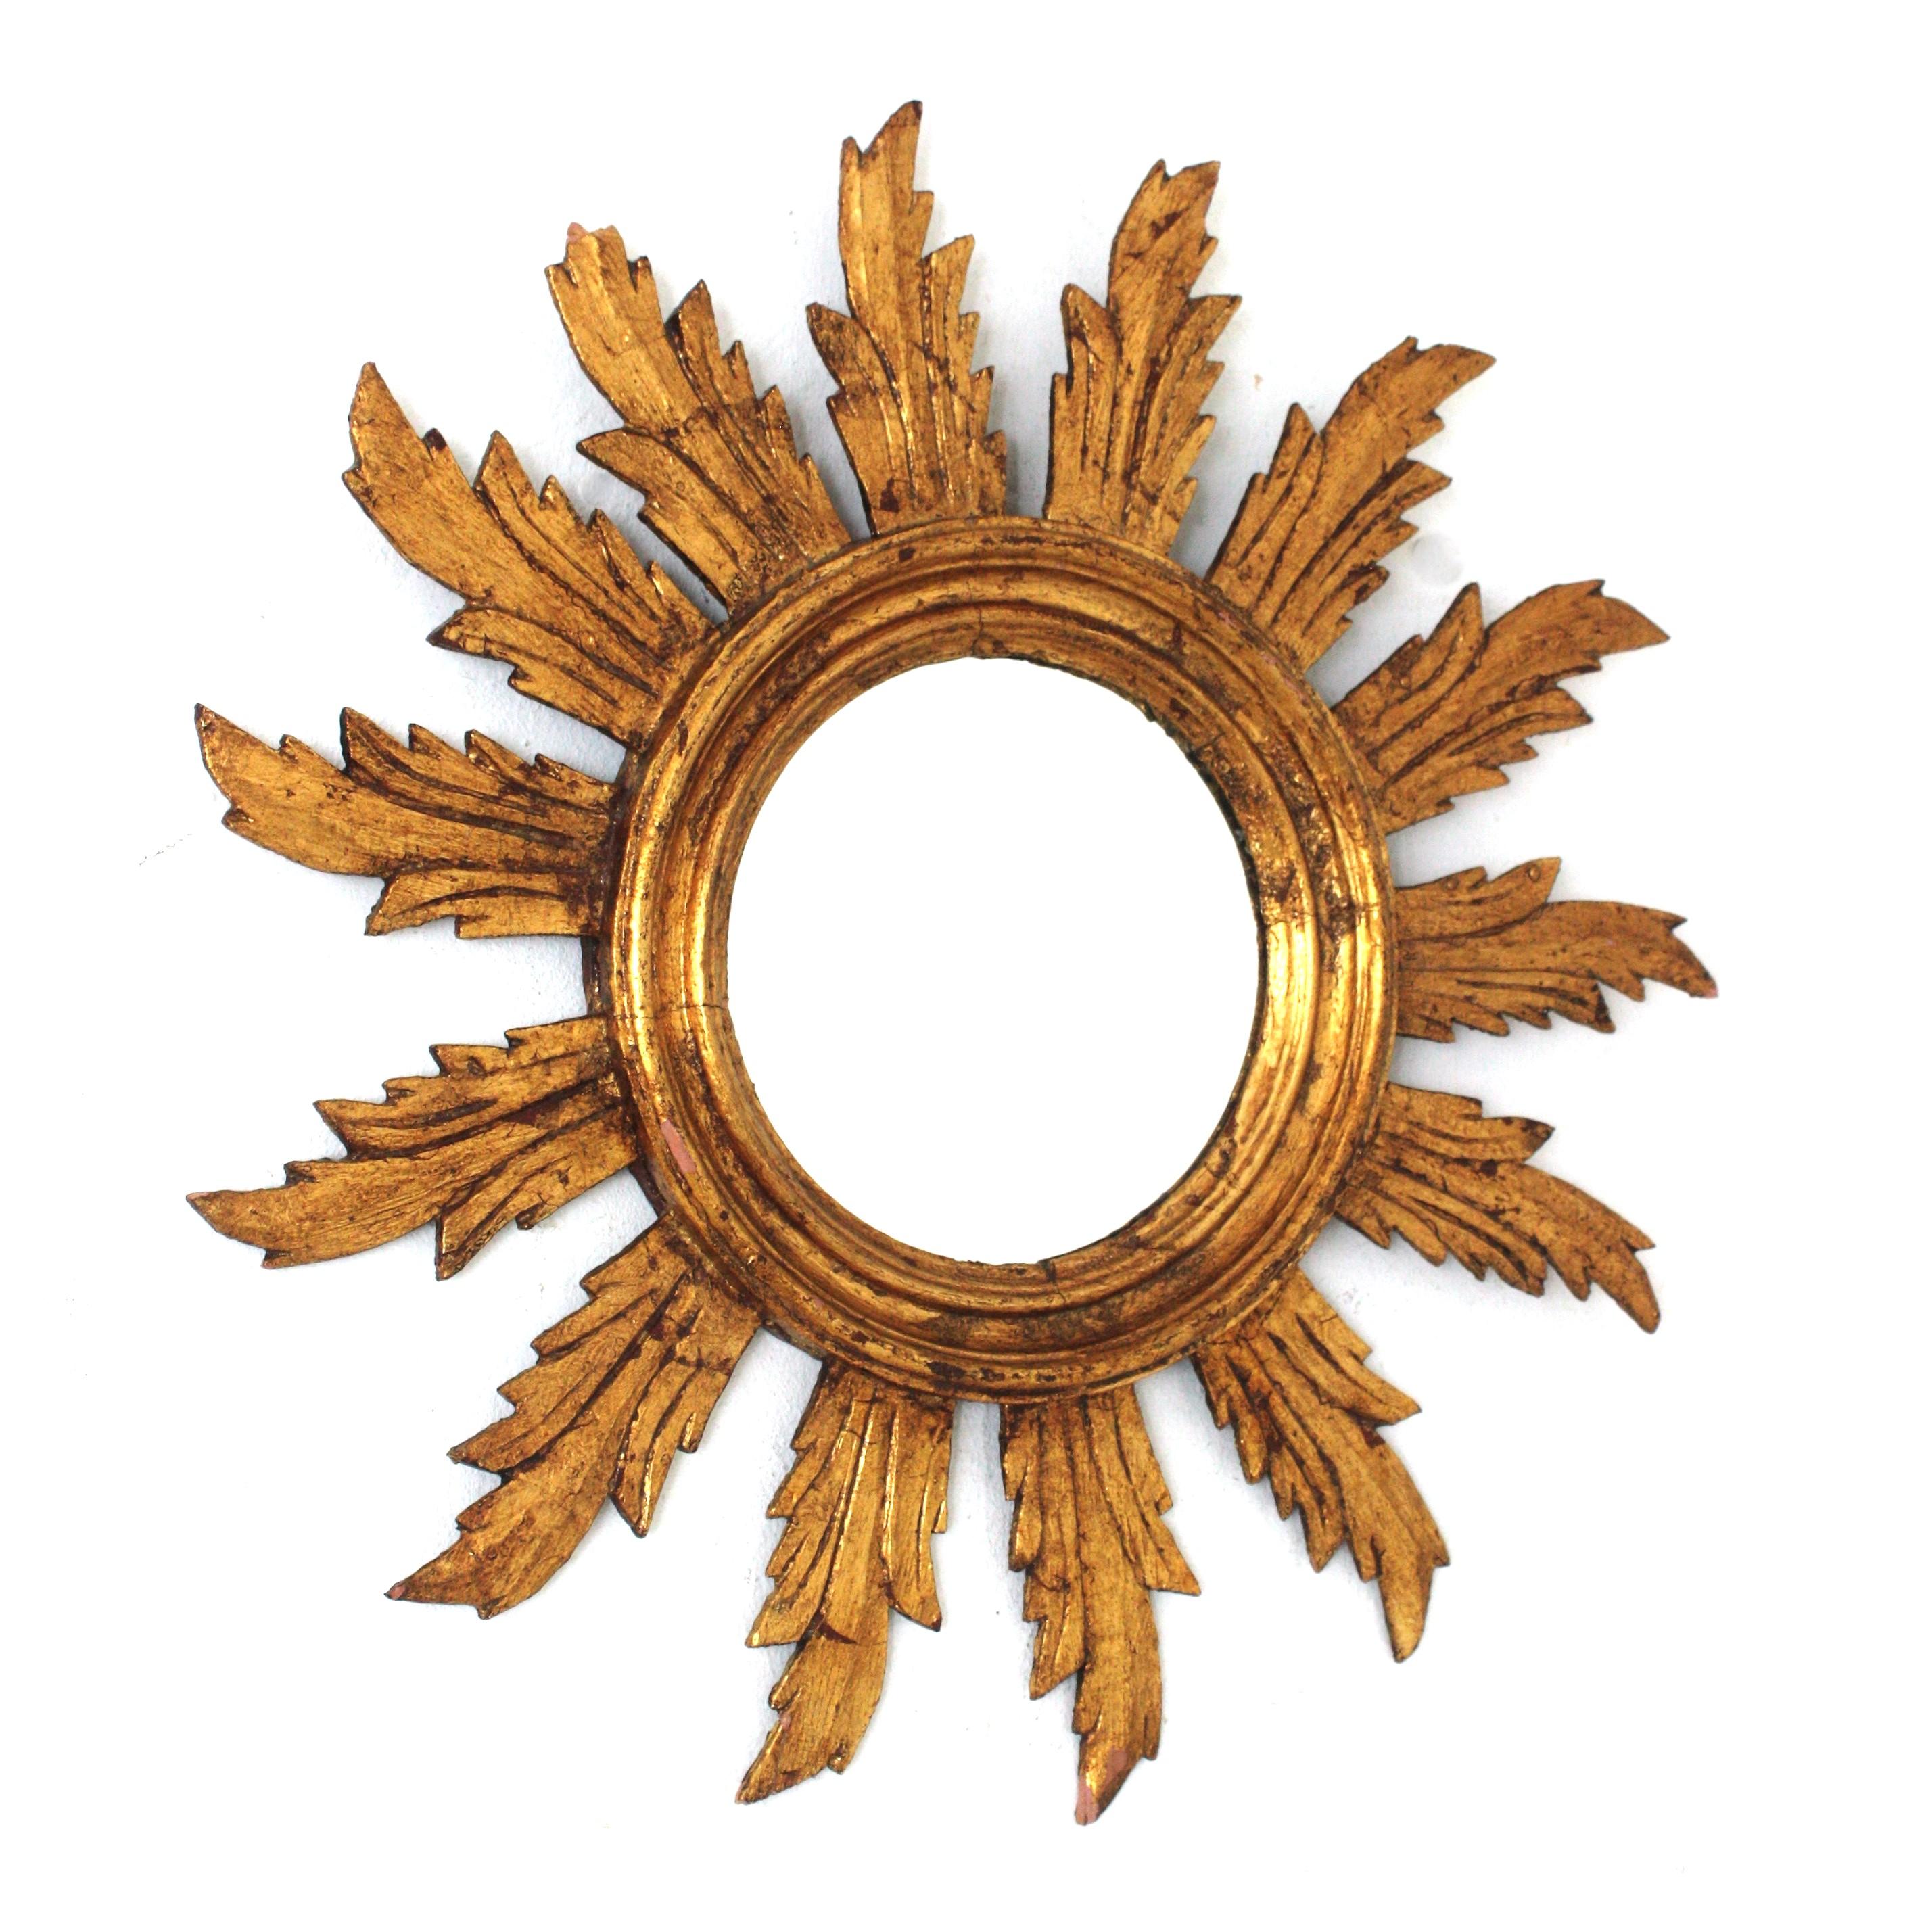 Eye-catching carved giltwood spanish sunburst mirror, 1940s-1950s.
This sunburst mirror features a wood carved round frame surrounding the circular glass. A layer of rays with scalloped details with a central carved ring surrounding the glass. It